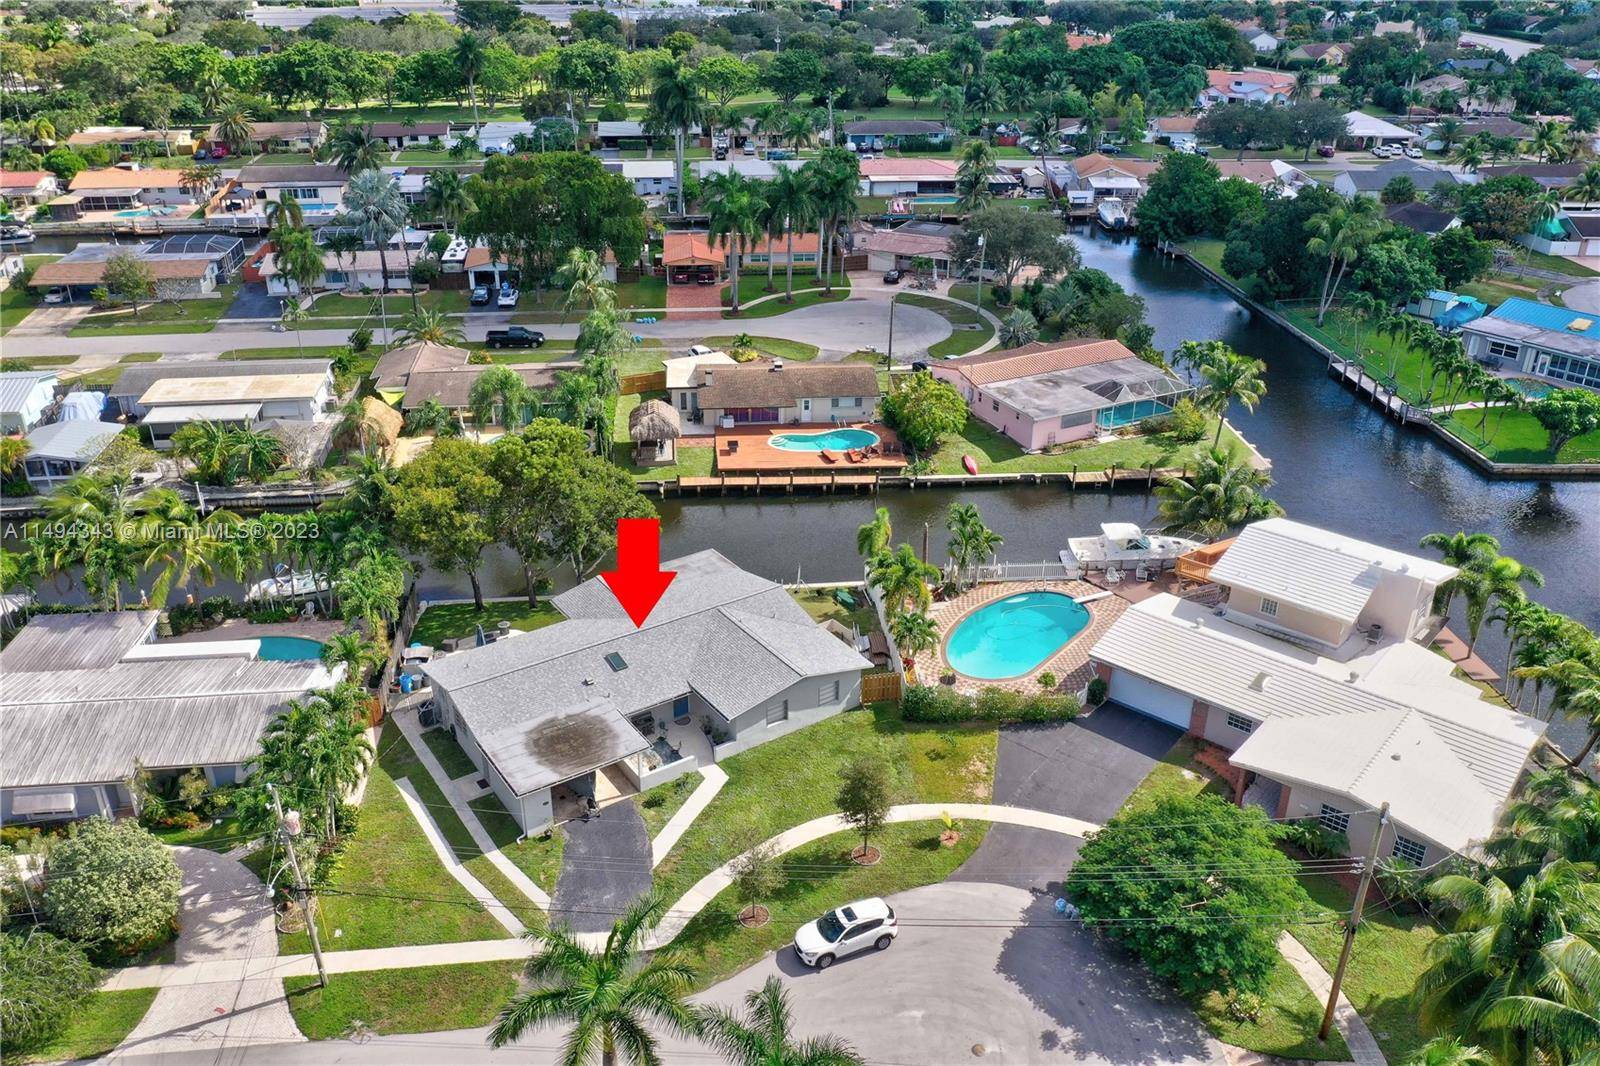 Nestled in the hidden tropical oasis of Plantation Isles, this large, 3 bed 3 bath home is located on a cul de sac No HOA.